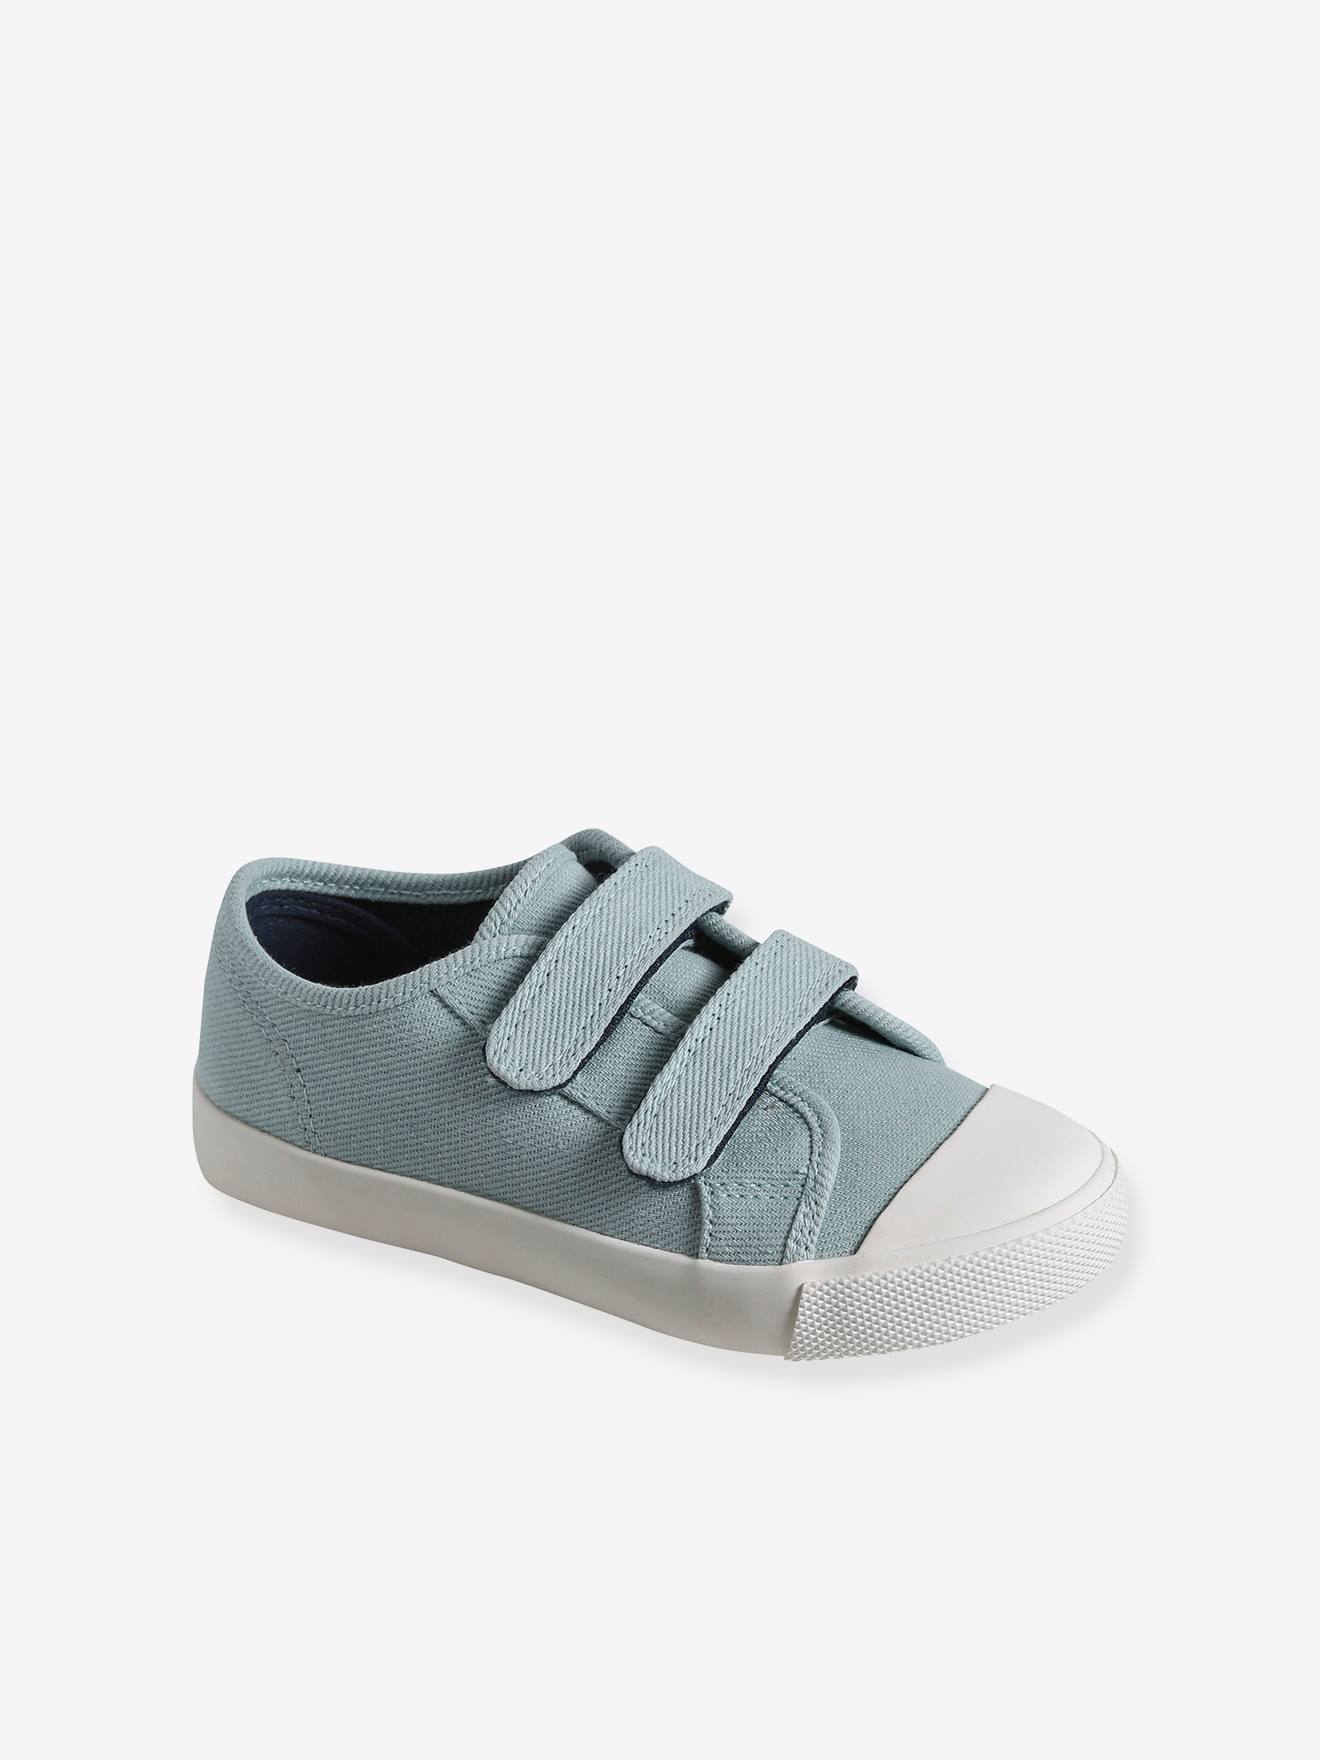 Fabric Trainers with Hook-&-Loop Straps, for Children sky blue